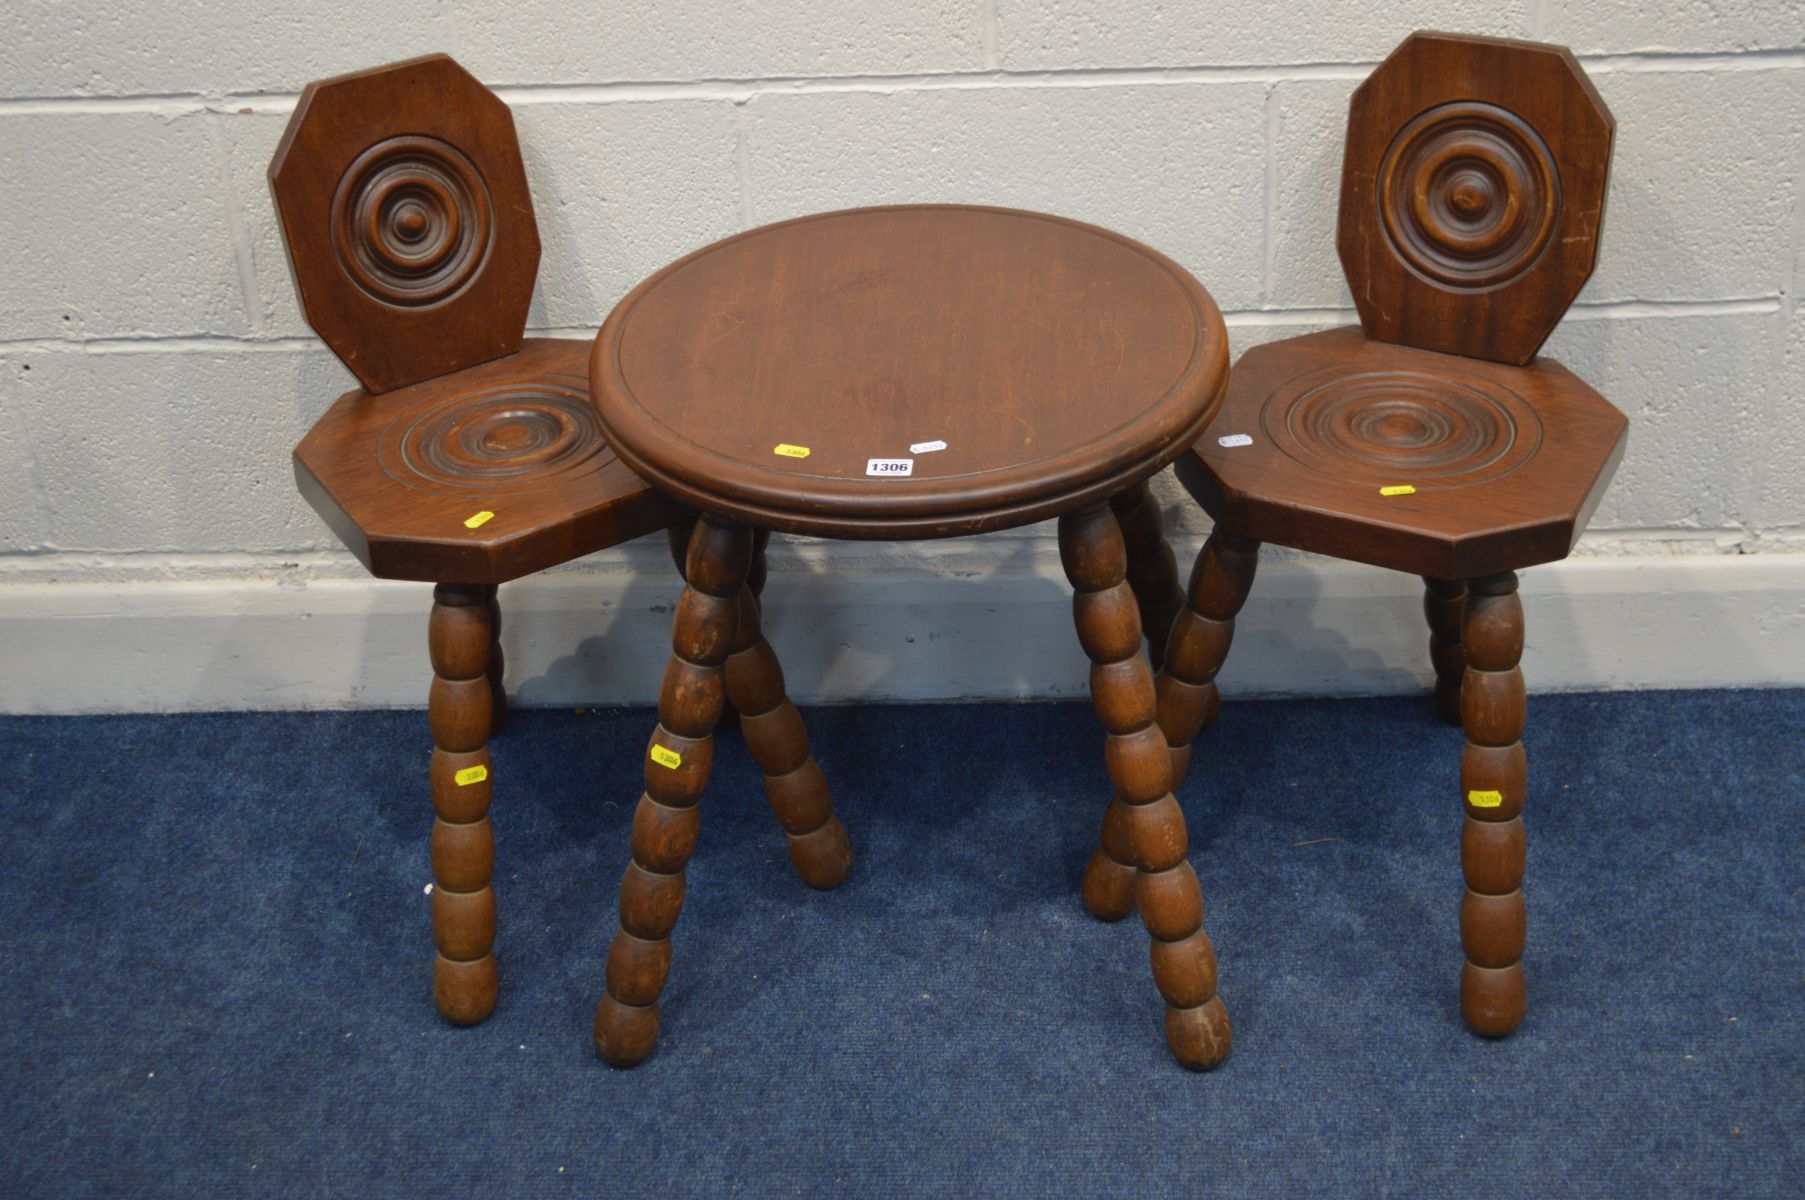 A PAIR OF MID TO LATE 20TH CENTURY MAHOGANY SPINNING CHAIRS together with a matching circular